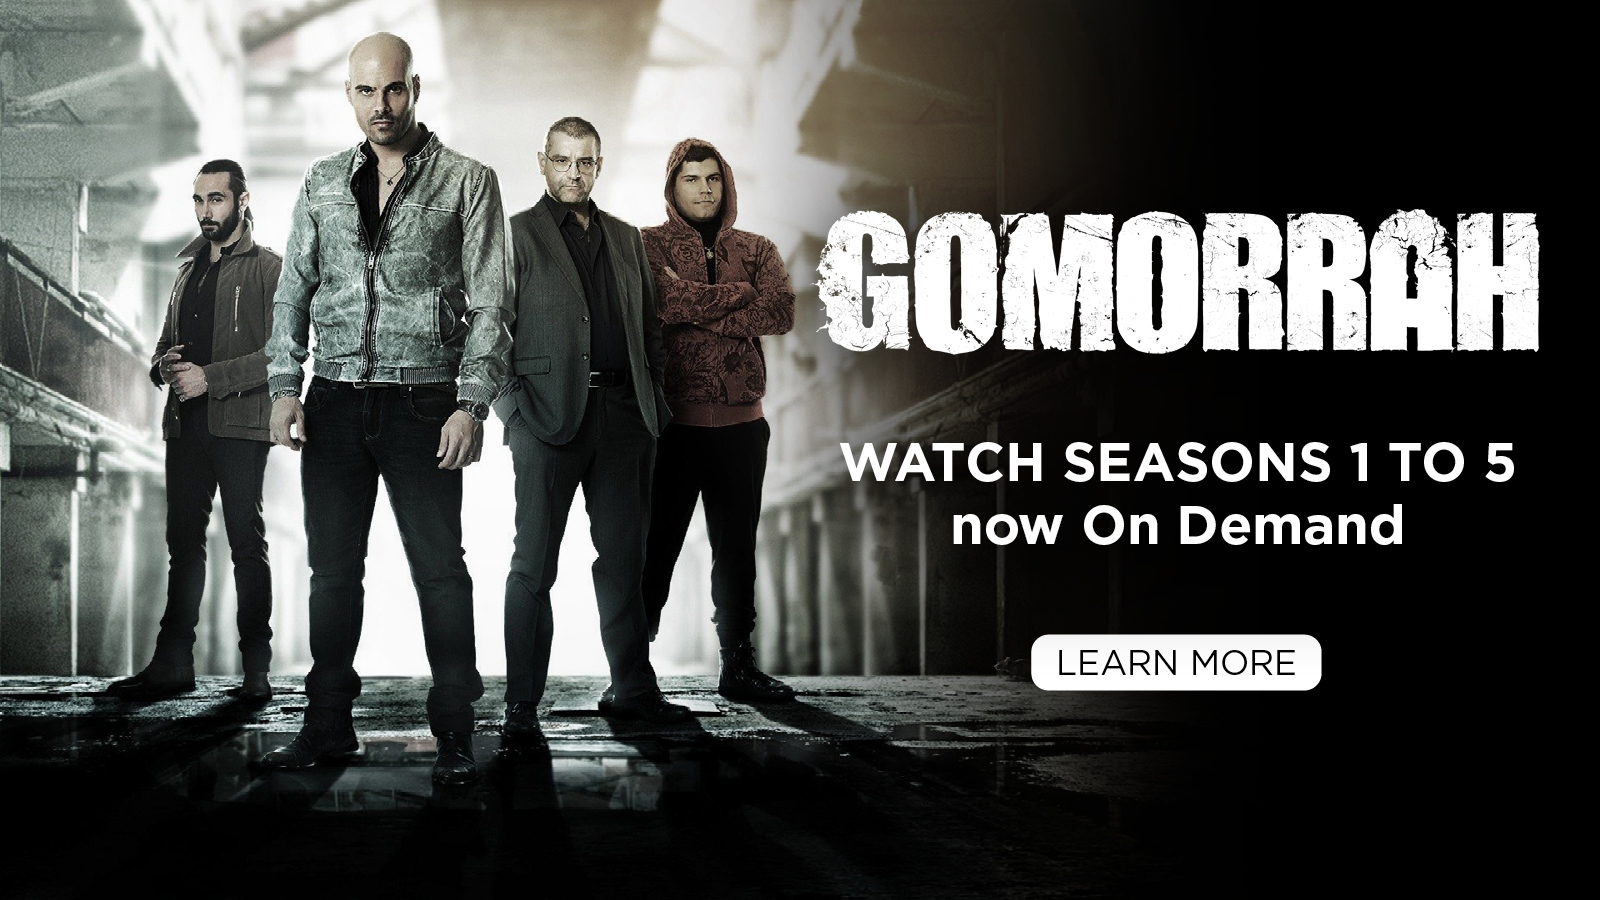 Gomorrah – Watch seasons 1 to 5 now on demand – Learn more